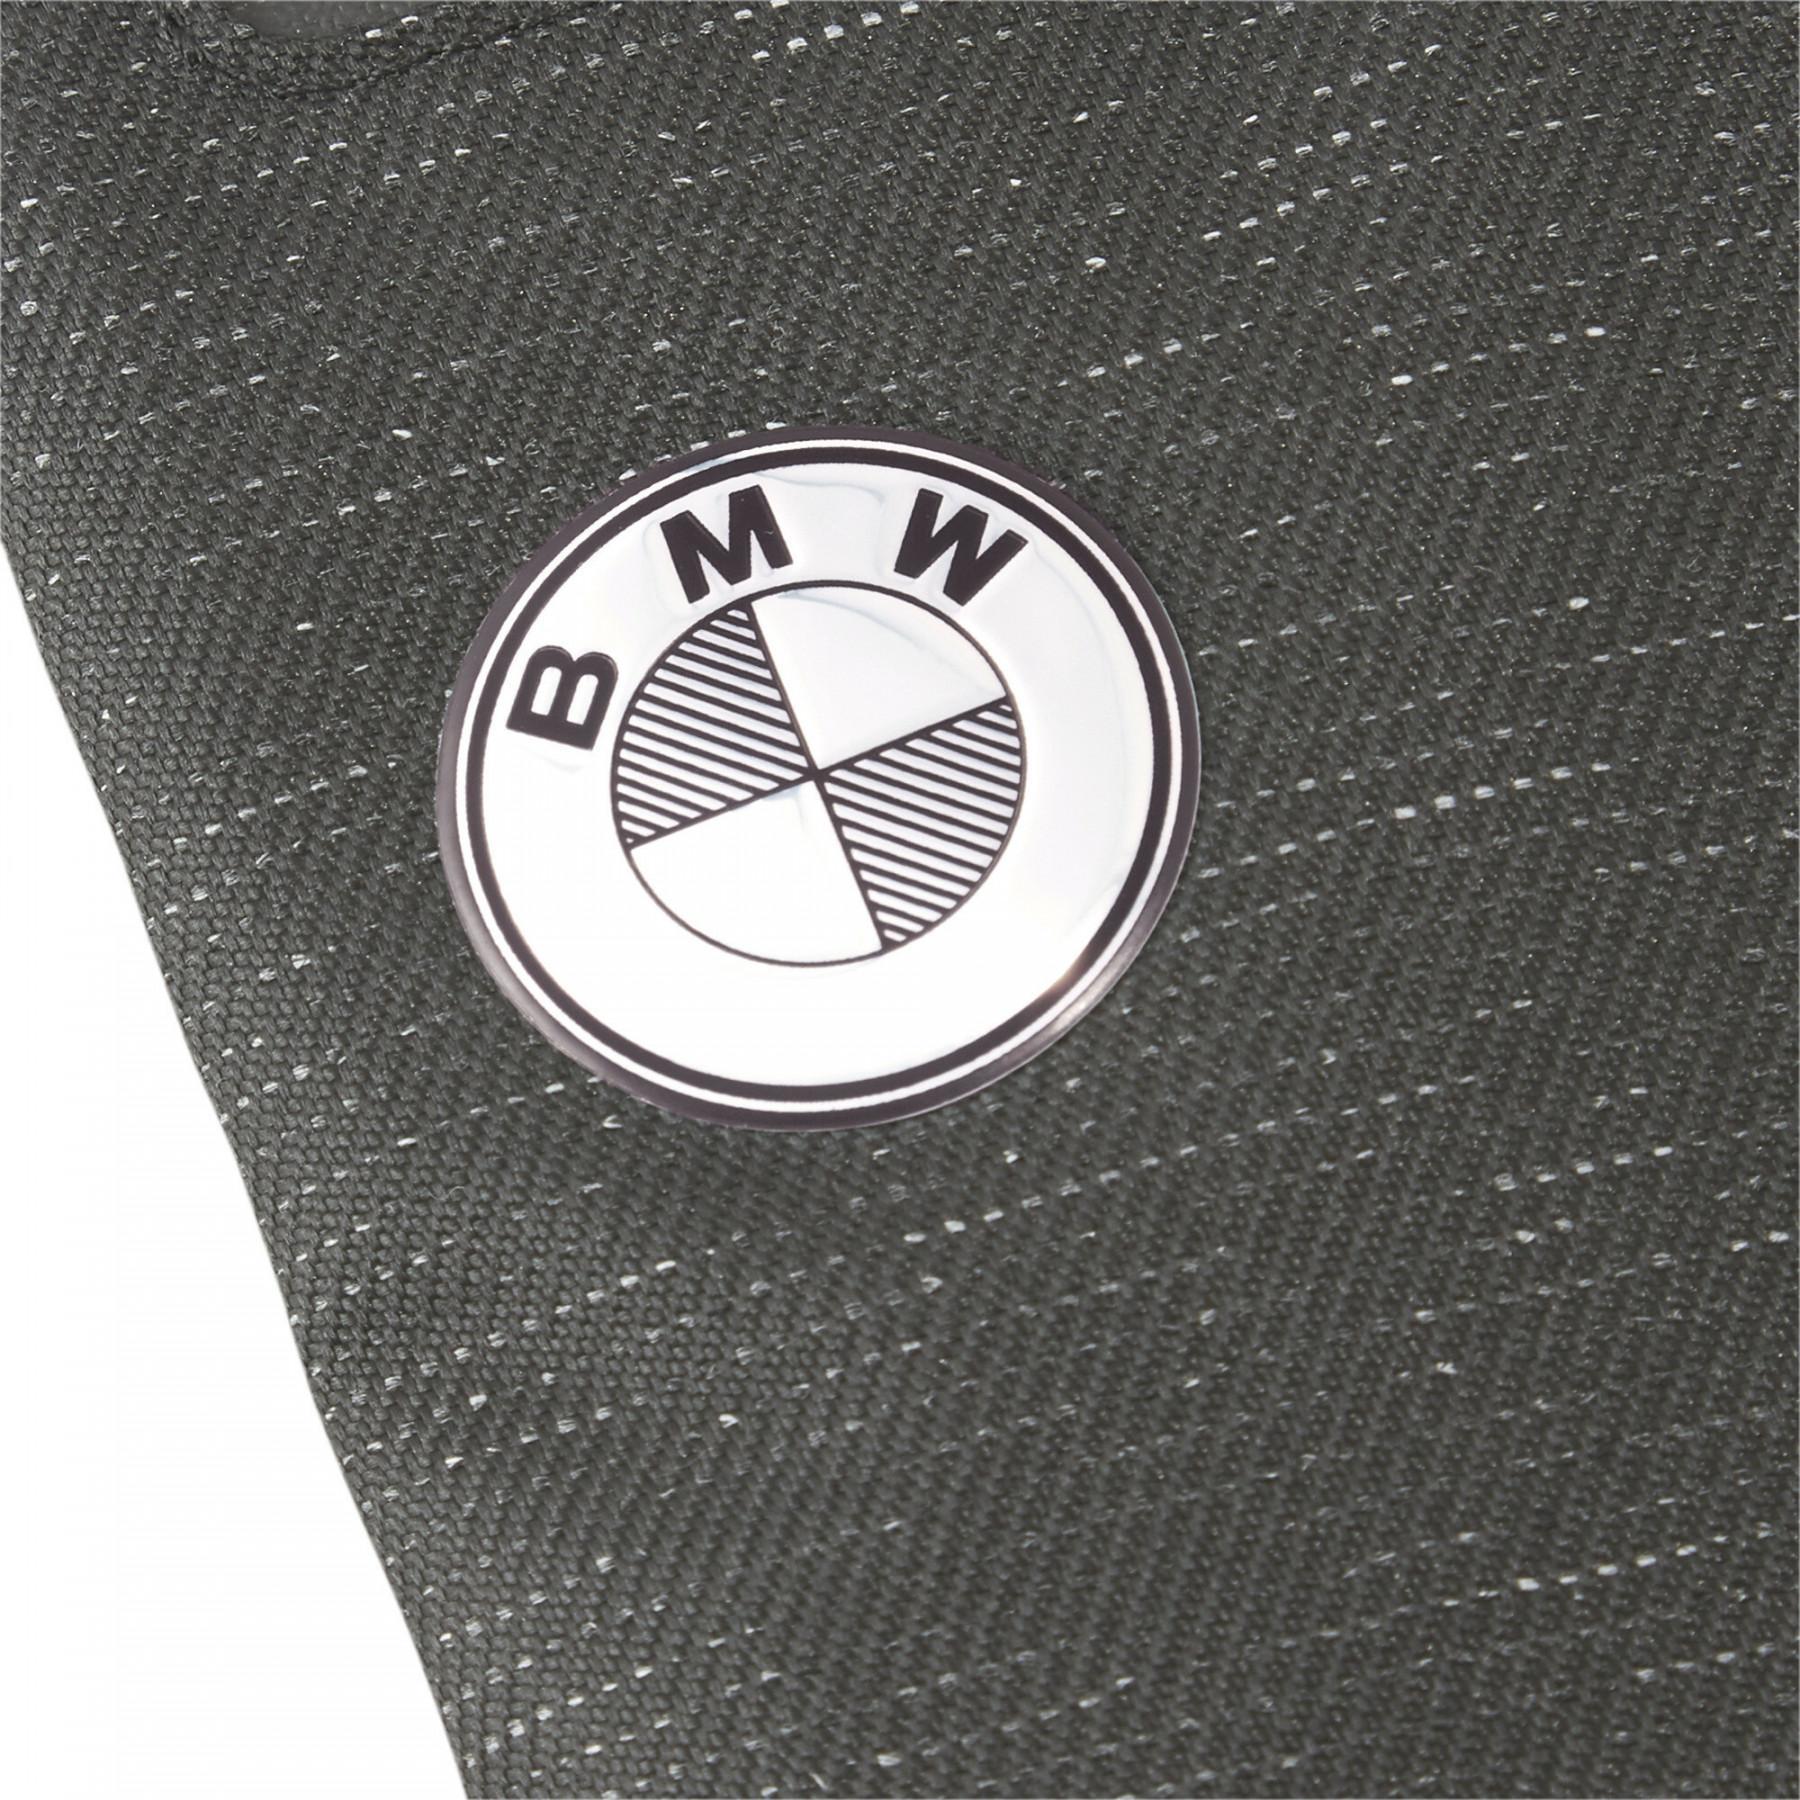 Cartera BMW MTSP RCT in 1 - Otros clubes - Clubes - Fan